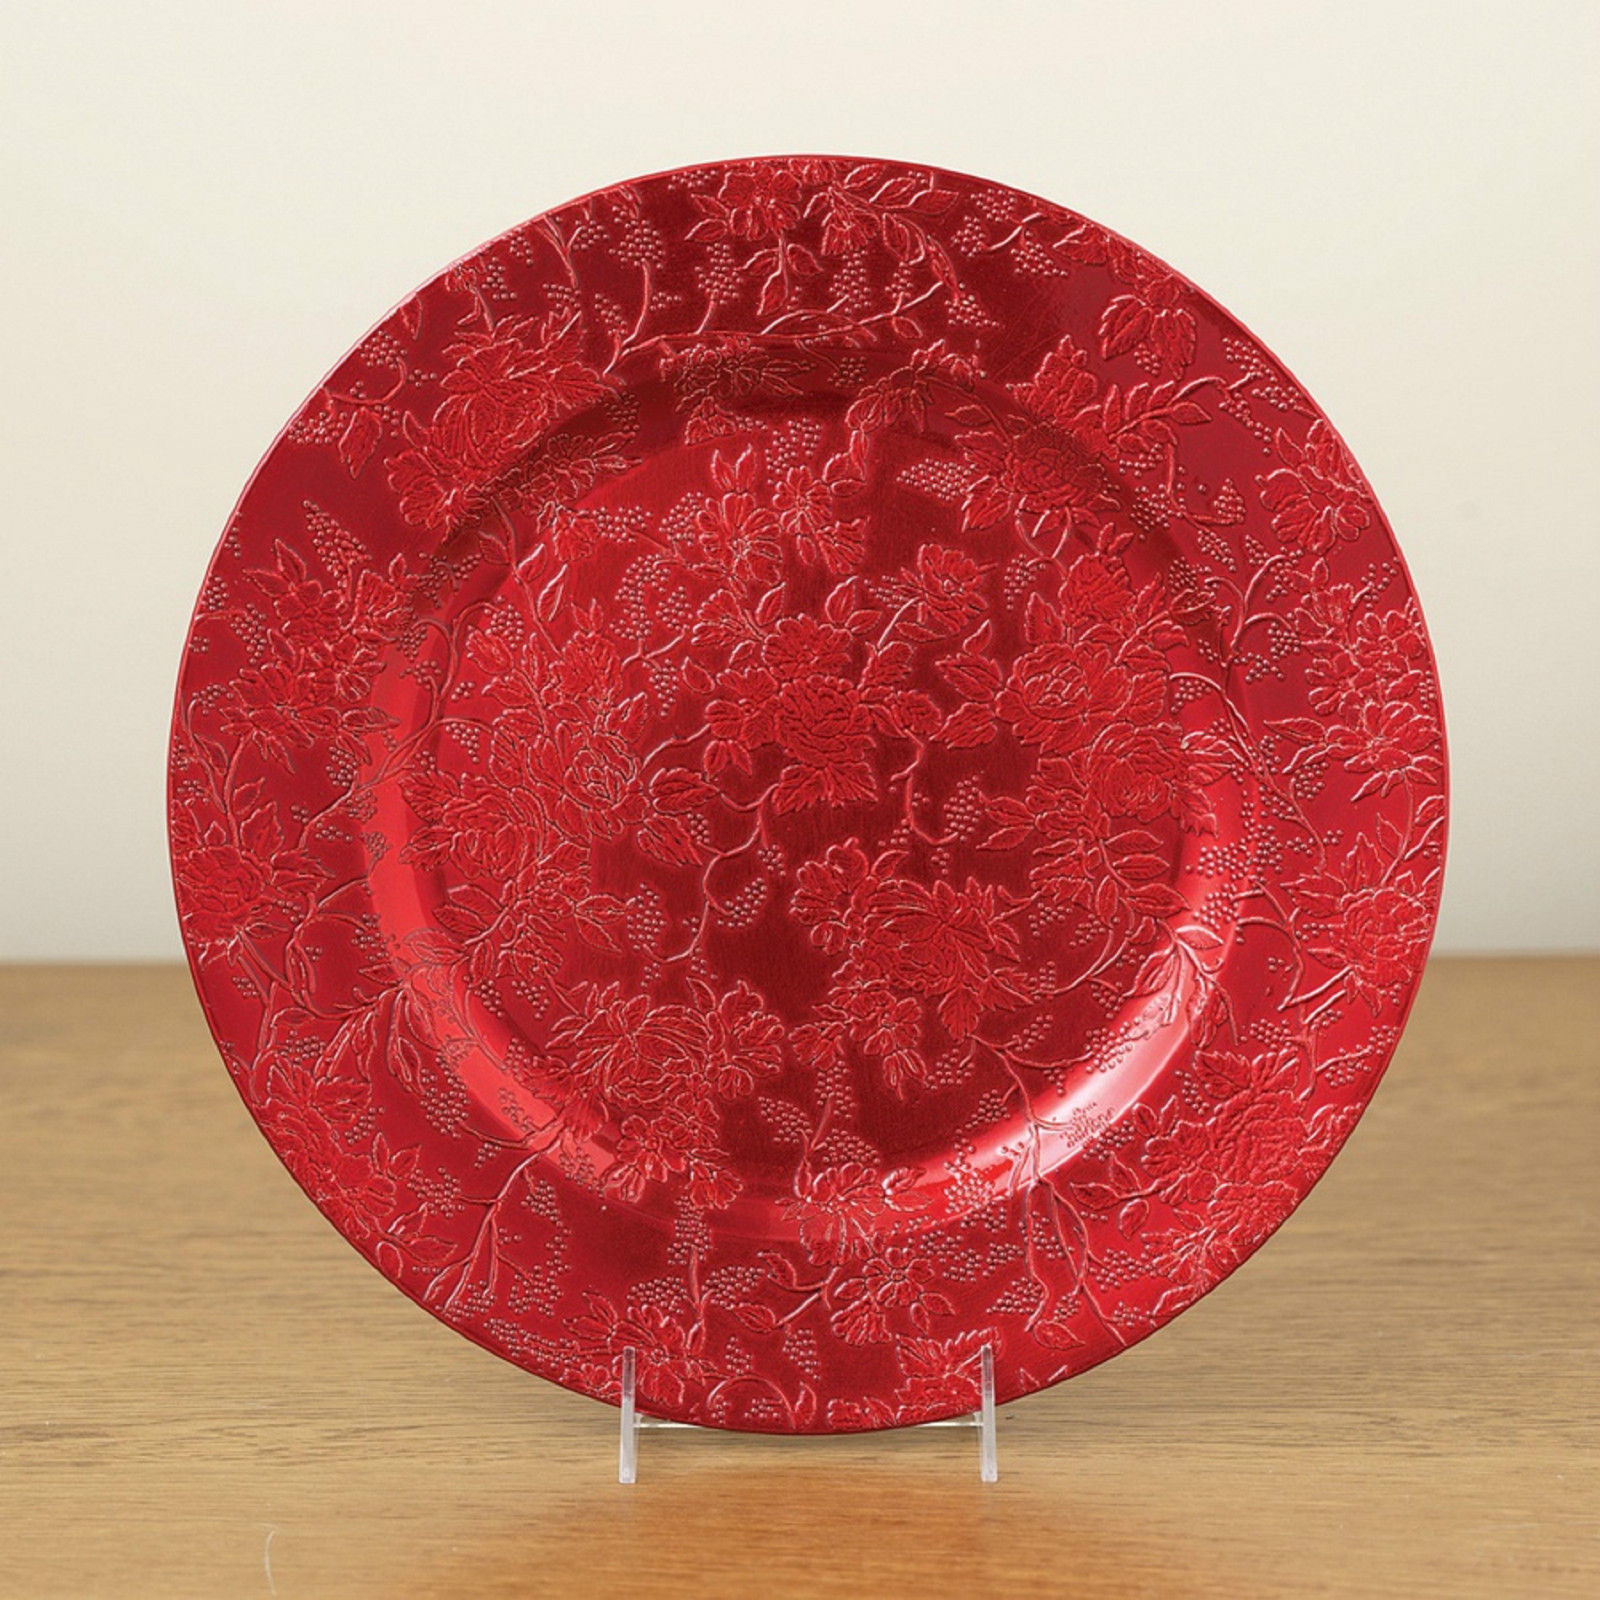 Antique Embossed Design Red Charger Plate  13" (New) - $25.00